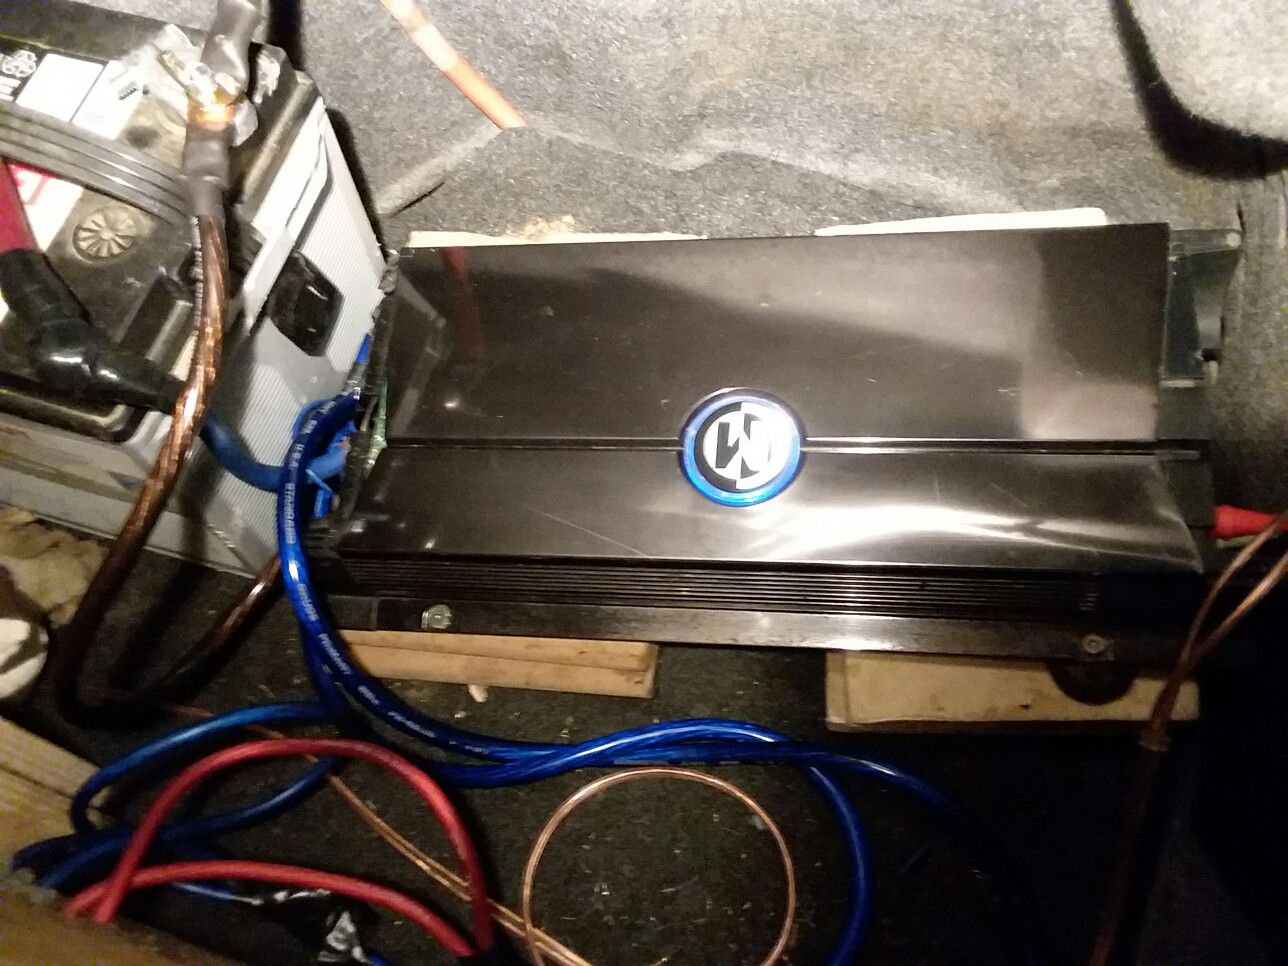 Memphis M Class 16-MCD1000 1100x1 rms Monoblock amplifier, 1 ohm stable, 0.75 tdh very under estimated amp, much stronger than my MTX Thunder 1500.1d